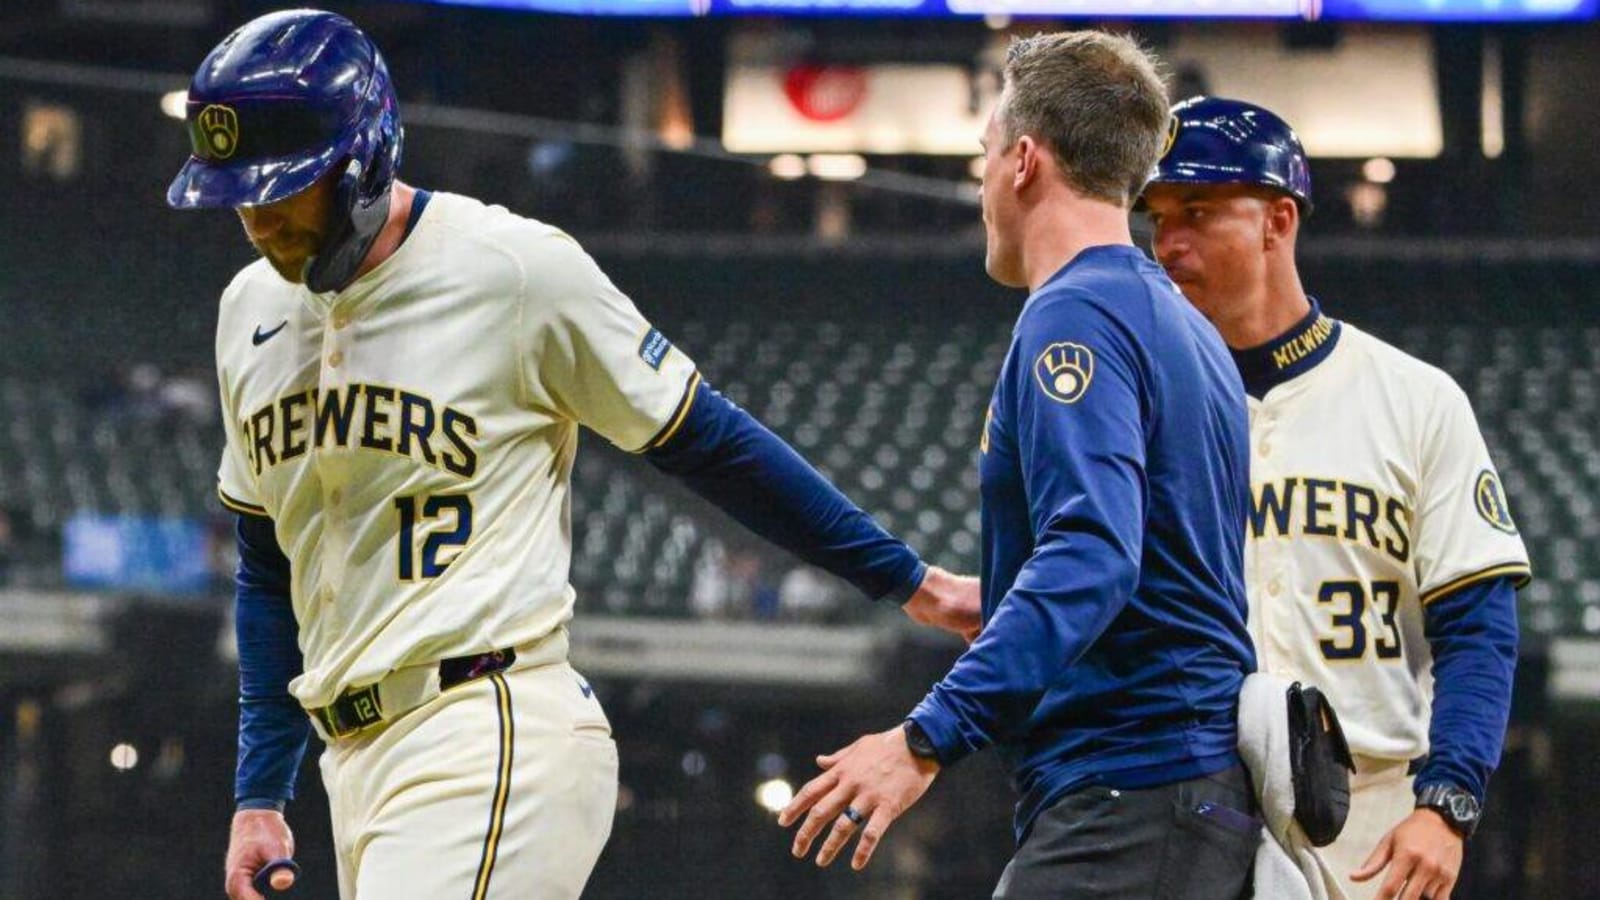 Rhys Hoskins Hamstring Injury Doubles Pain of Brewers Loss to Pirates